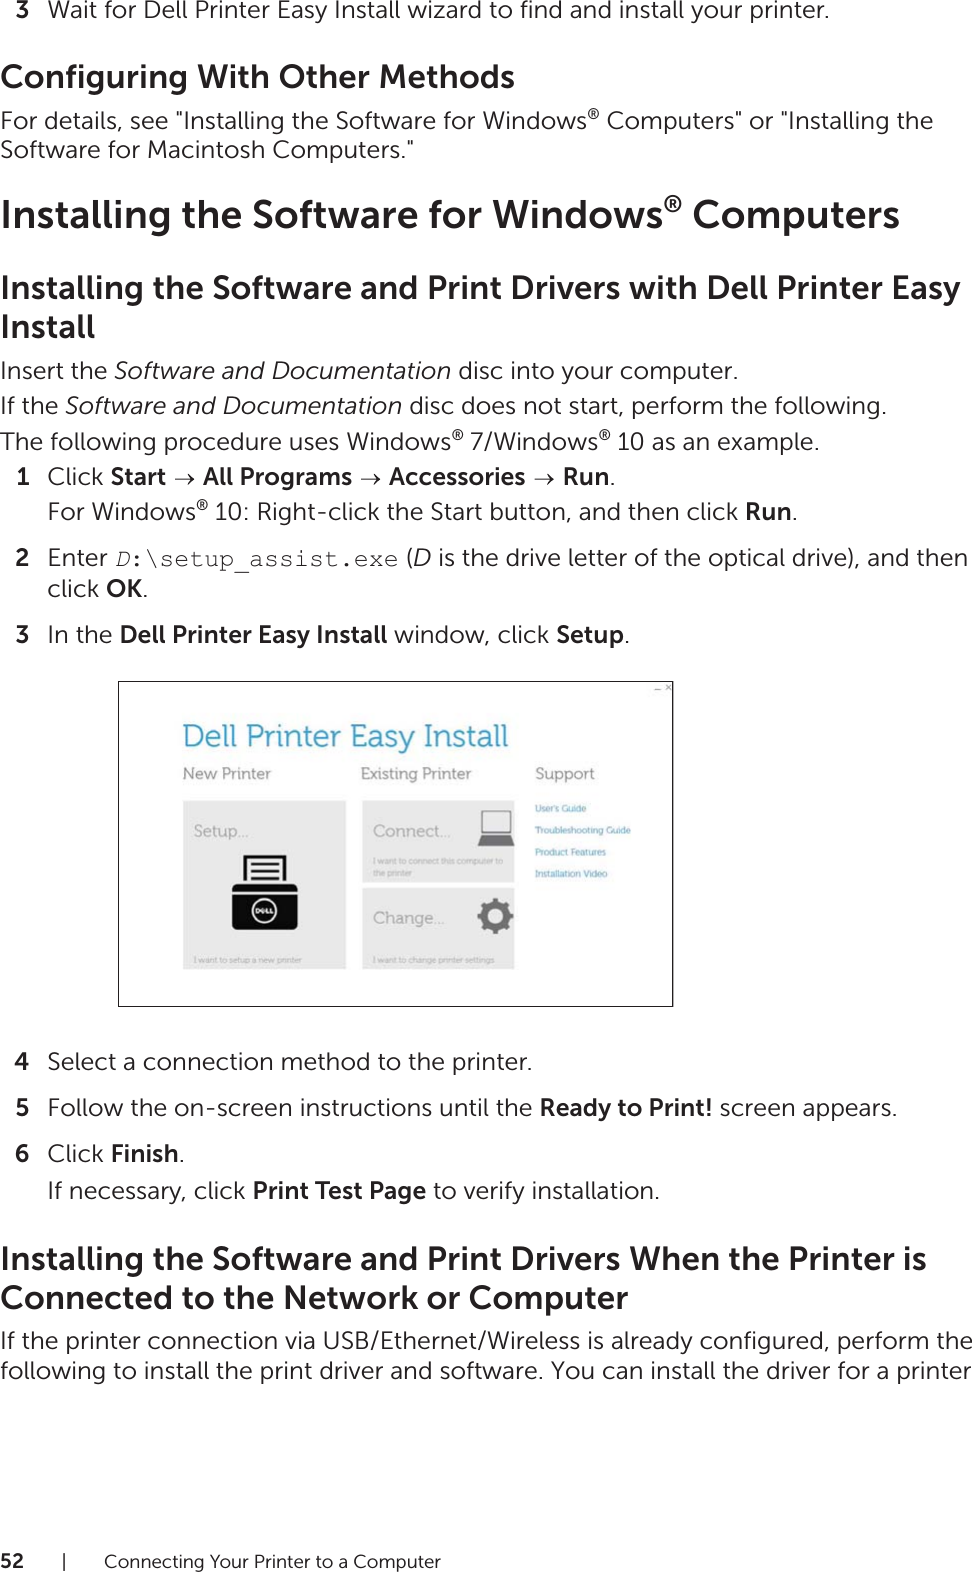 52| Connecting Your Printer to a Computer3Wait for Dell Printer Easy Install wizard to find and install your printer.Configuring With Other MethodsFor details, see &quot;Installing the Software for Windows® Computers&quot; or &quot;Installing the Software for Macintosh Computers.&quot;Installing the Software for Windows® ComputersInstalling the Software and Print Drivers with Dell Printer Easy InstallInsert the Software and Documentation disc into your computer.If the Software and Documentation disc does not start, perform the following.The following procedure uses Windows® 7/Windows® 10 as an example.1Click Start  All Programs  Accessories  Run.For Windows® 10: Right-click the Start button, and then click Run.2Enter D:\setup_assist.exe (D is the drive letter of the optical drive), and then click OK.3In the Dell Printer Easy Install window, click Setup.4Select a connection method to the printer.5Follow the on-screen instructions until the Ready to Print! screen appears.6Click Finish.If necessary, click Print Test Page to verify installation.Installing the Software and Print Drivers When the Printer is Connected to the Network or ComputerIf the printer connection via USB/Ethernet/Wireless is already configured, perform the following to install the print driver and software. You can install the driver for a printer 